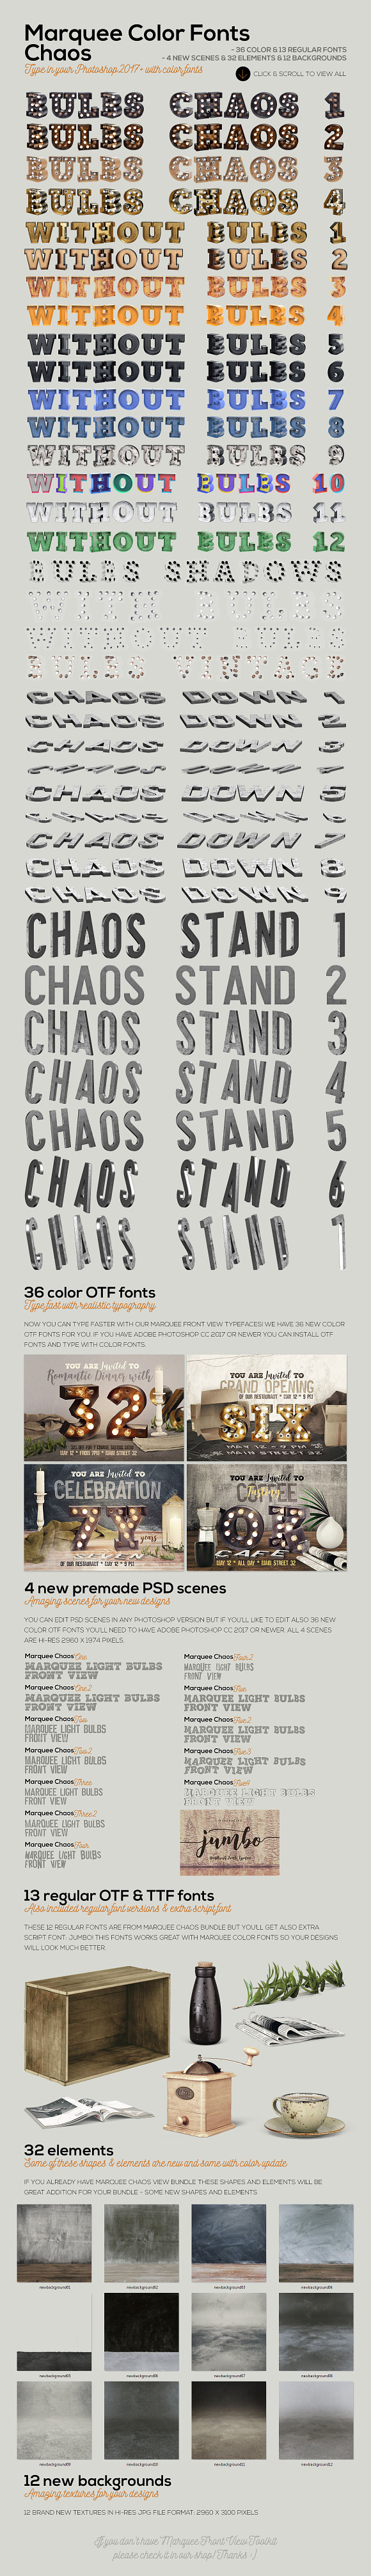 Marquee Chaos View - Color Fonts in Display Fonts - product preview 2